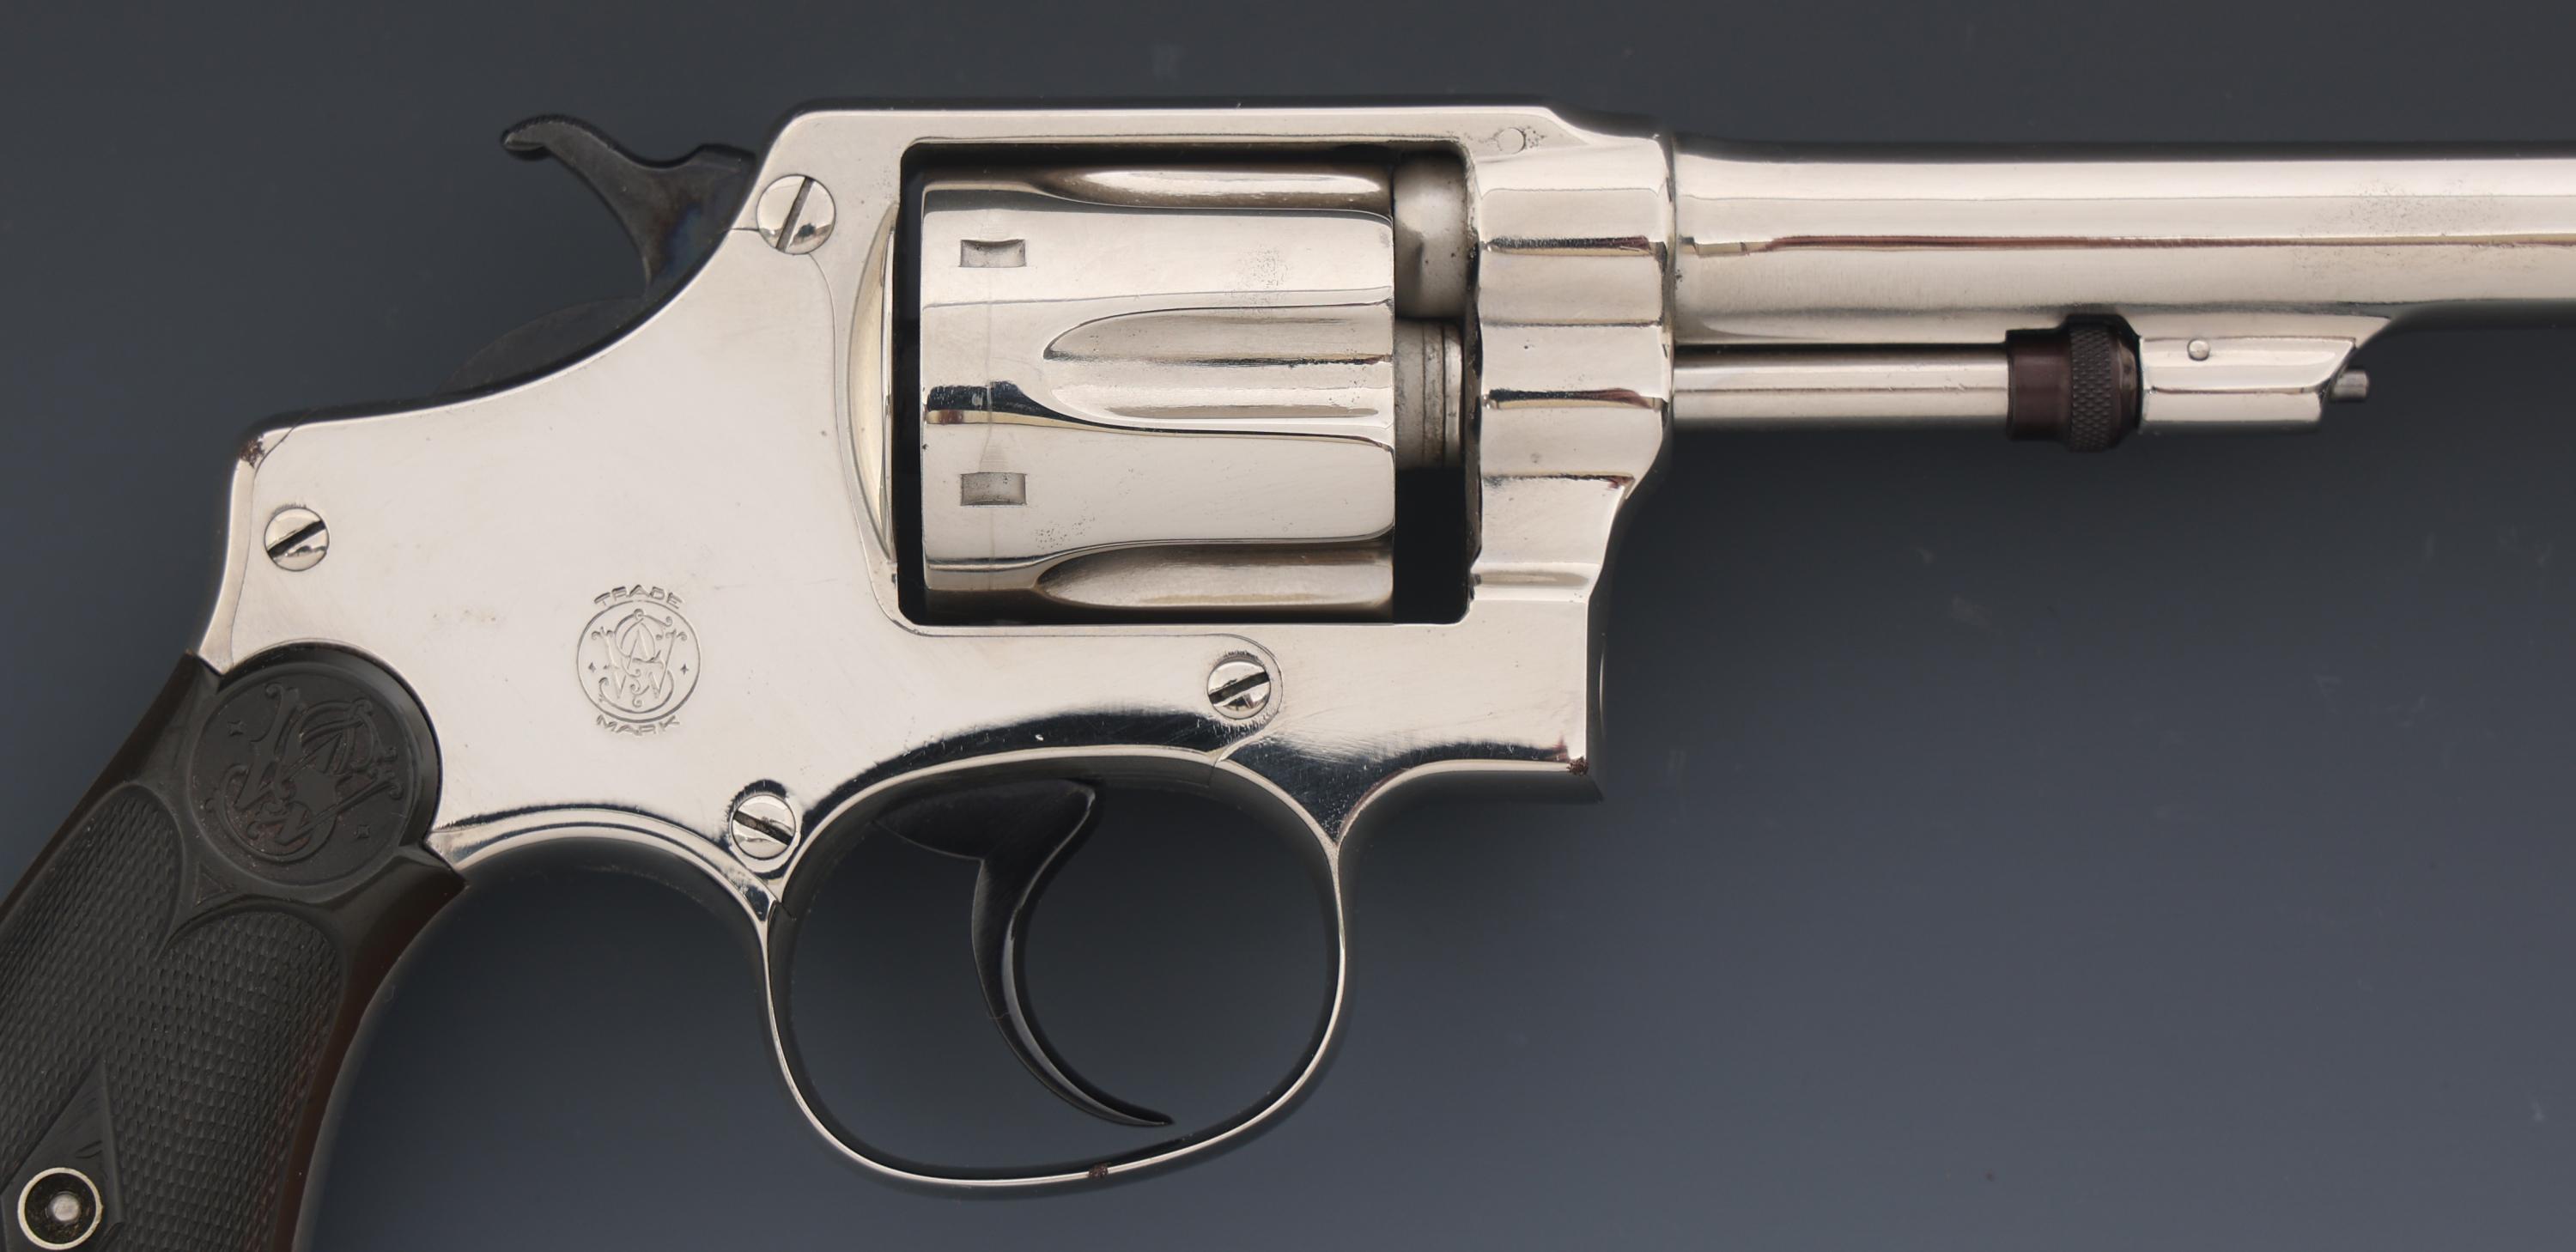 SMITH & WESSON MODEL OF 1903 2ND MODEL 32 REVOLVER